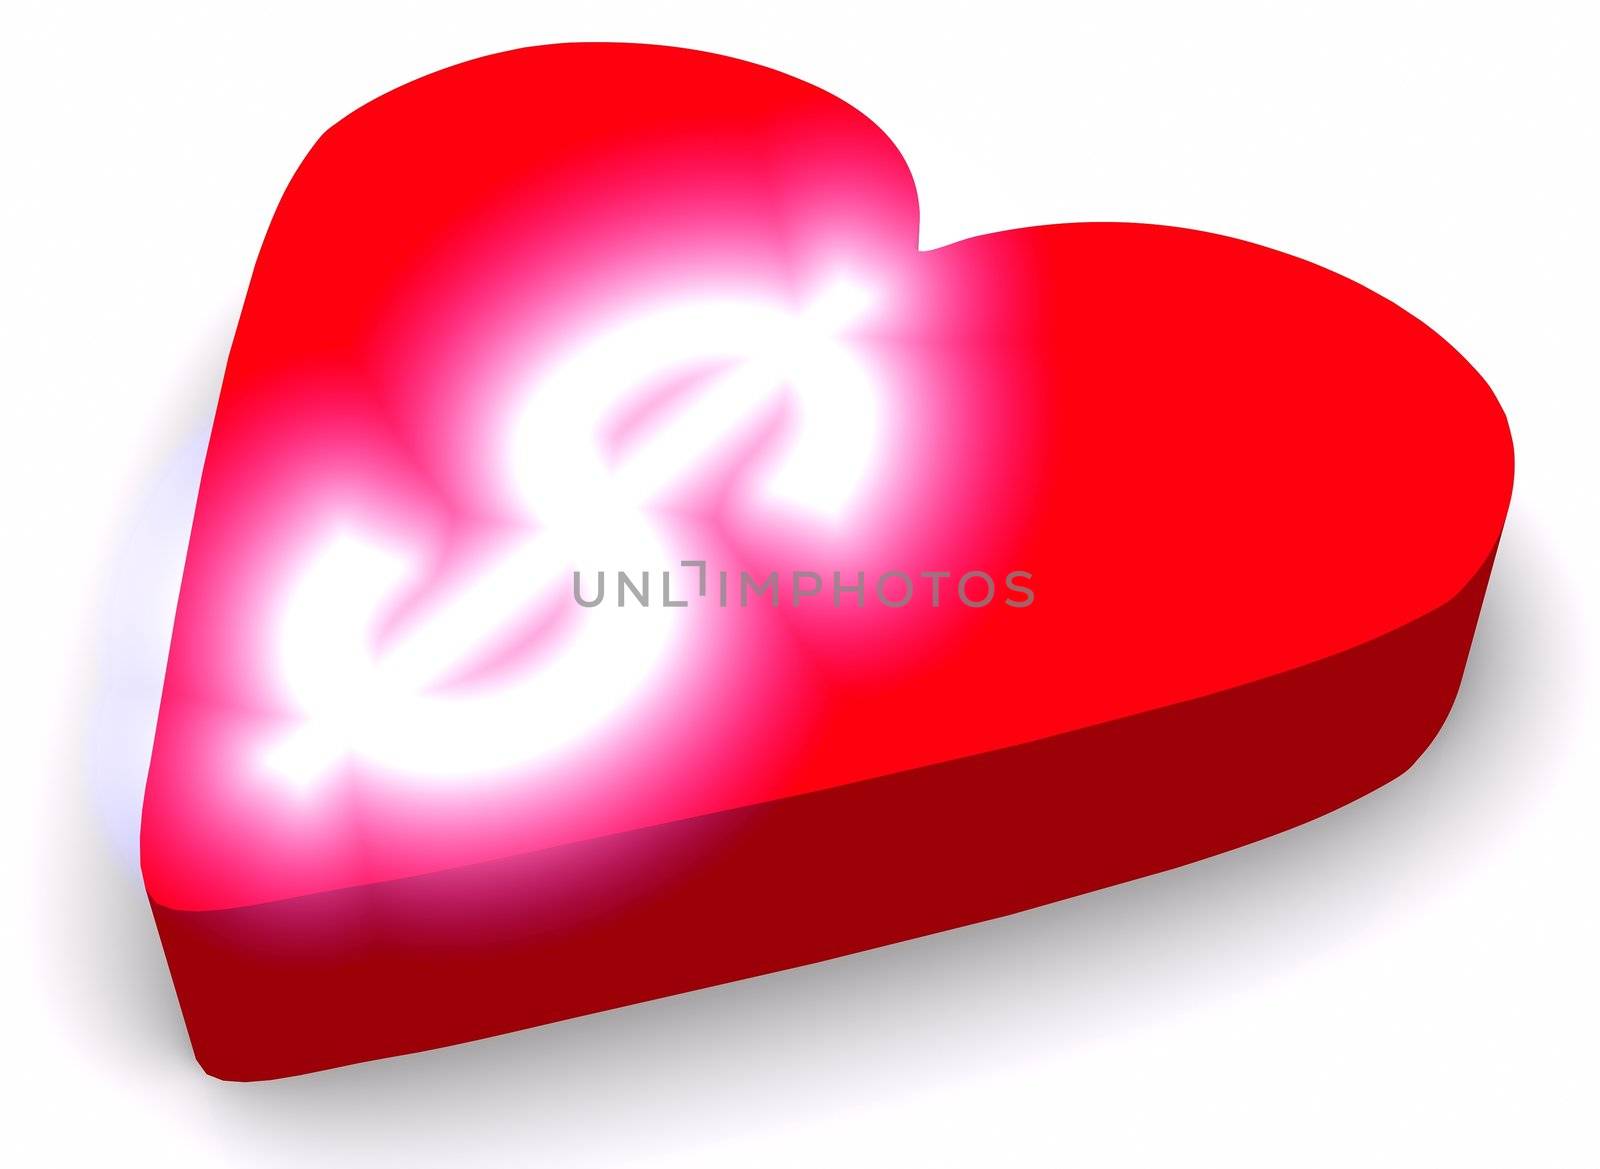 Concept of love for dollars or money generally. Idea is portrayed by white intensively glowing dollar rendered on the top of red heart. Scene rendered and isolated on white background.